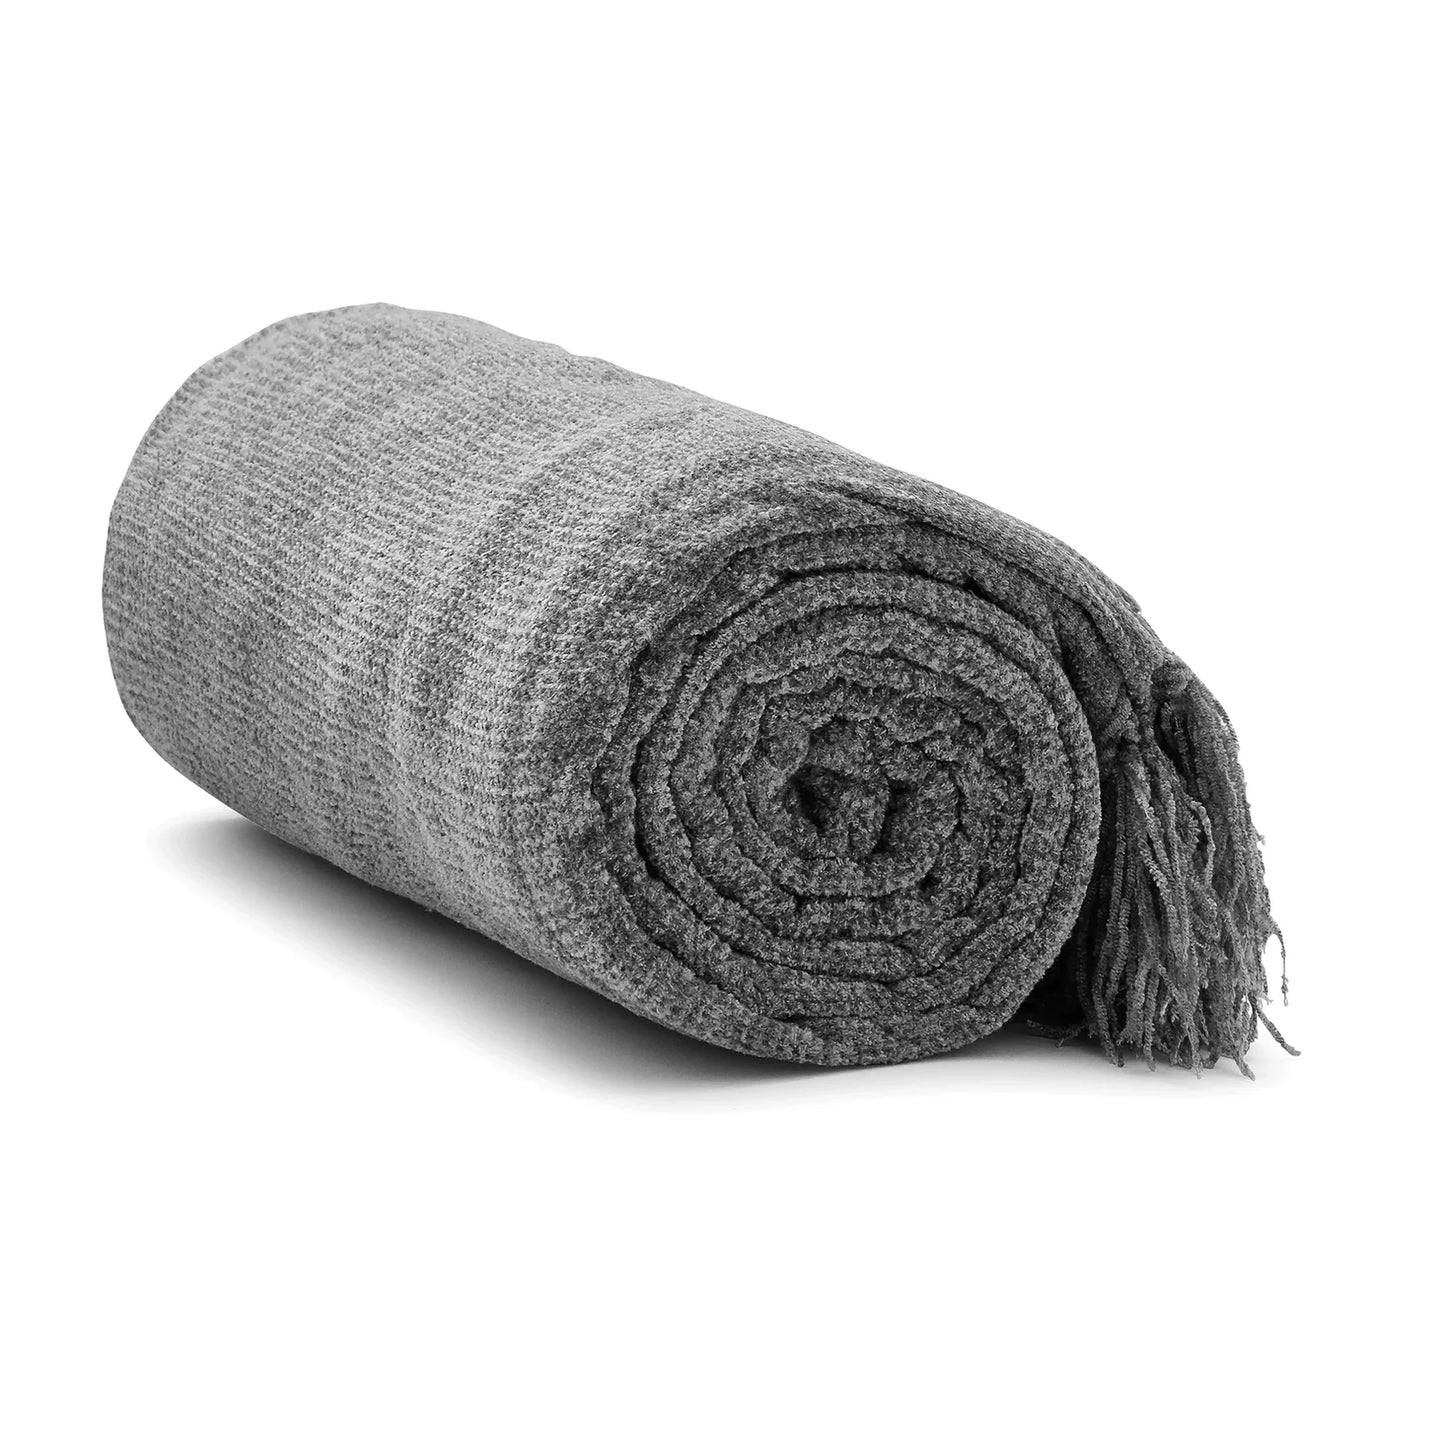 Chenille Throw Blanket by American Flat